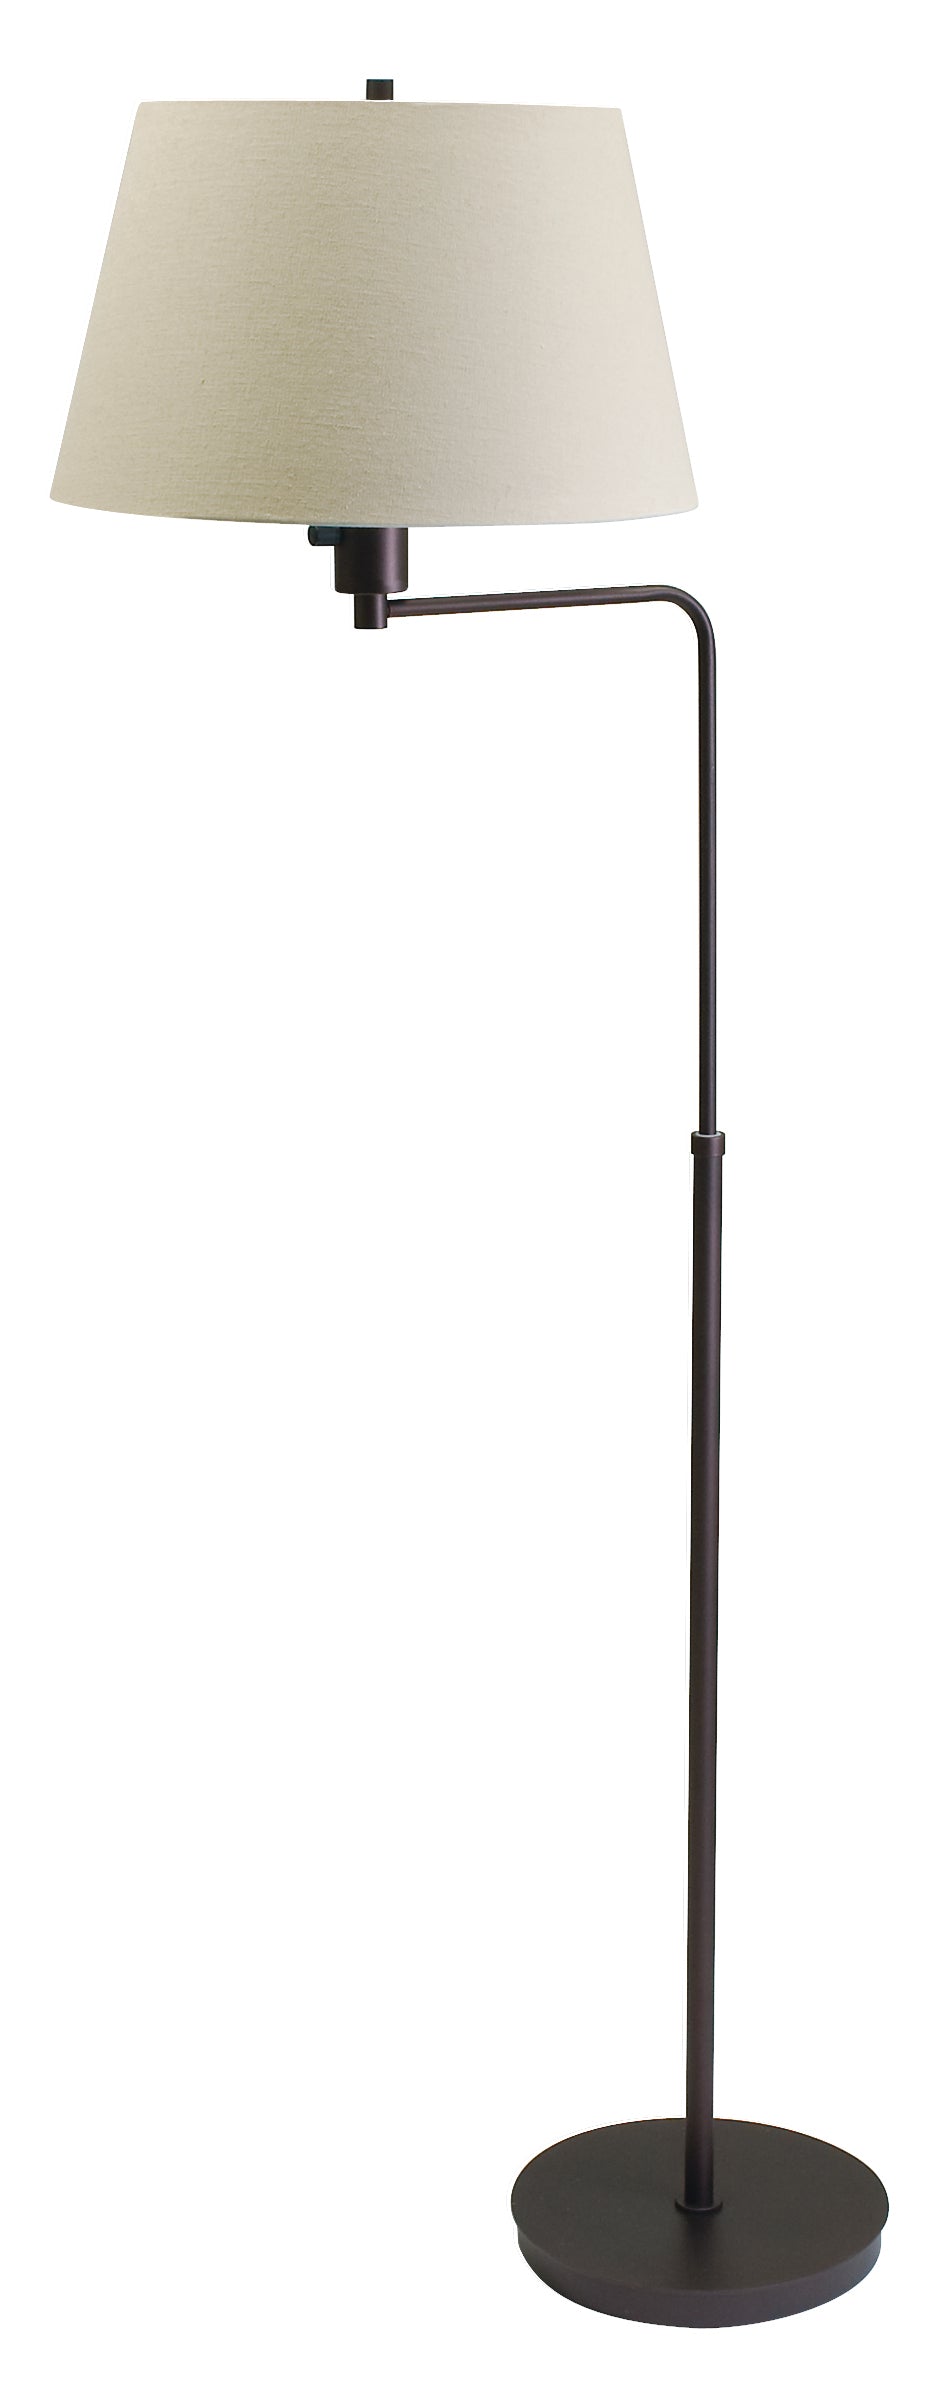 House of Troy Generation Collection Adjustable Floor Lamp Chestnut Bronze G200-CHB